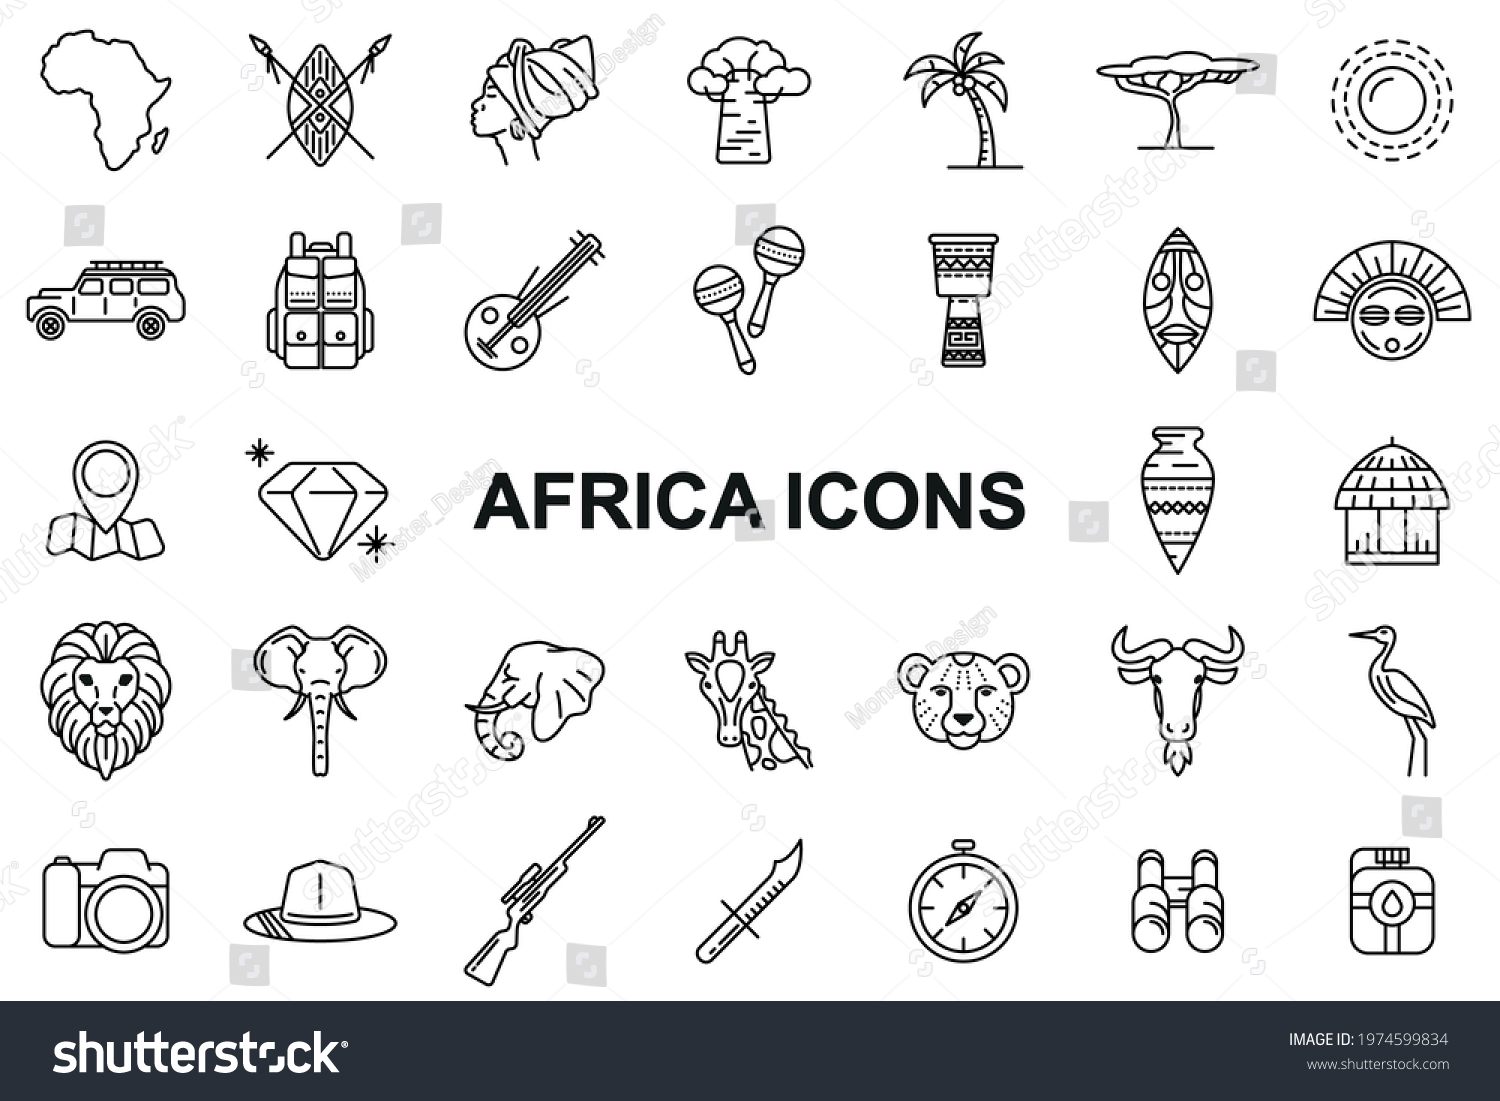 SVG of Africa Icons - Editable stroke svg